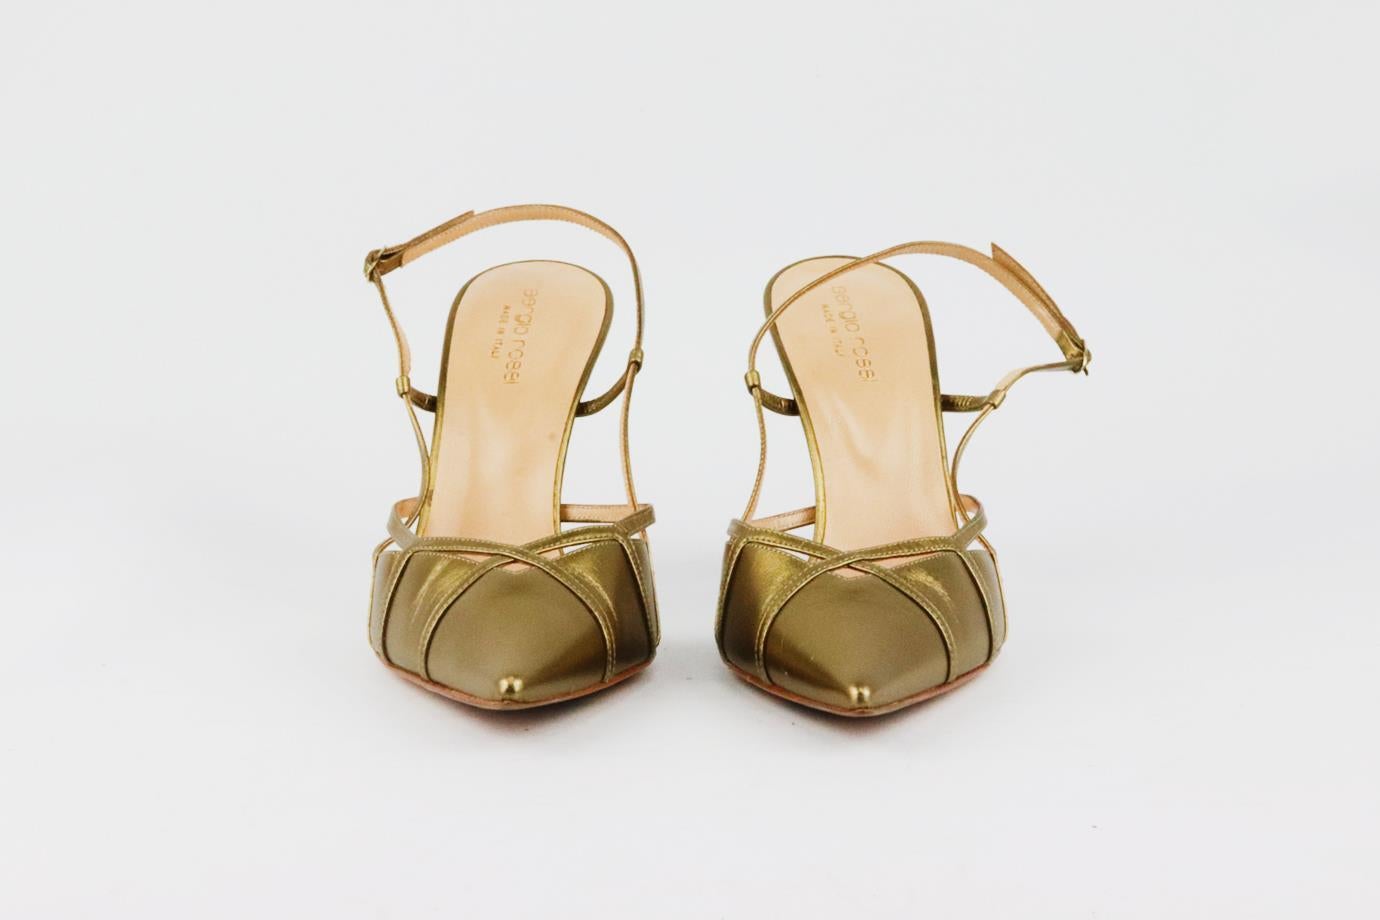 These pumps by Sergio Rossi are made from smooth gold leather and framed with a cutout detail, plus a slingback strap to gracefully follow the shape of your foot. Heel measures approximately 76 mm/ 3 inches. Metallic leather. Buckle fastening at